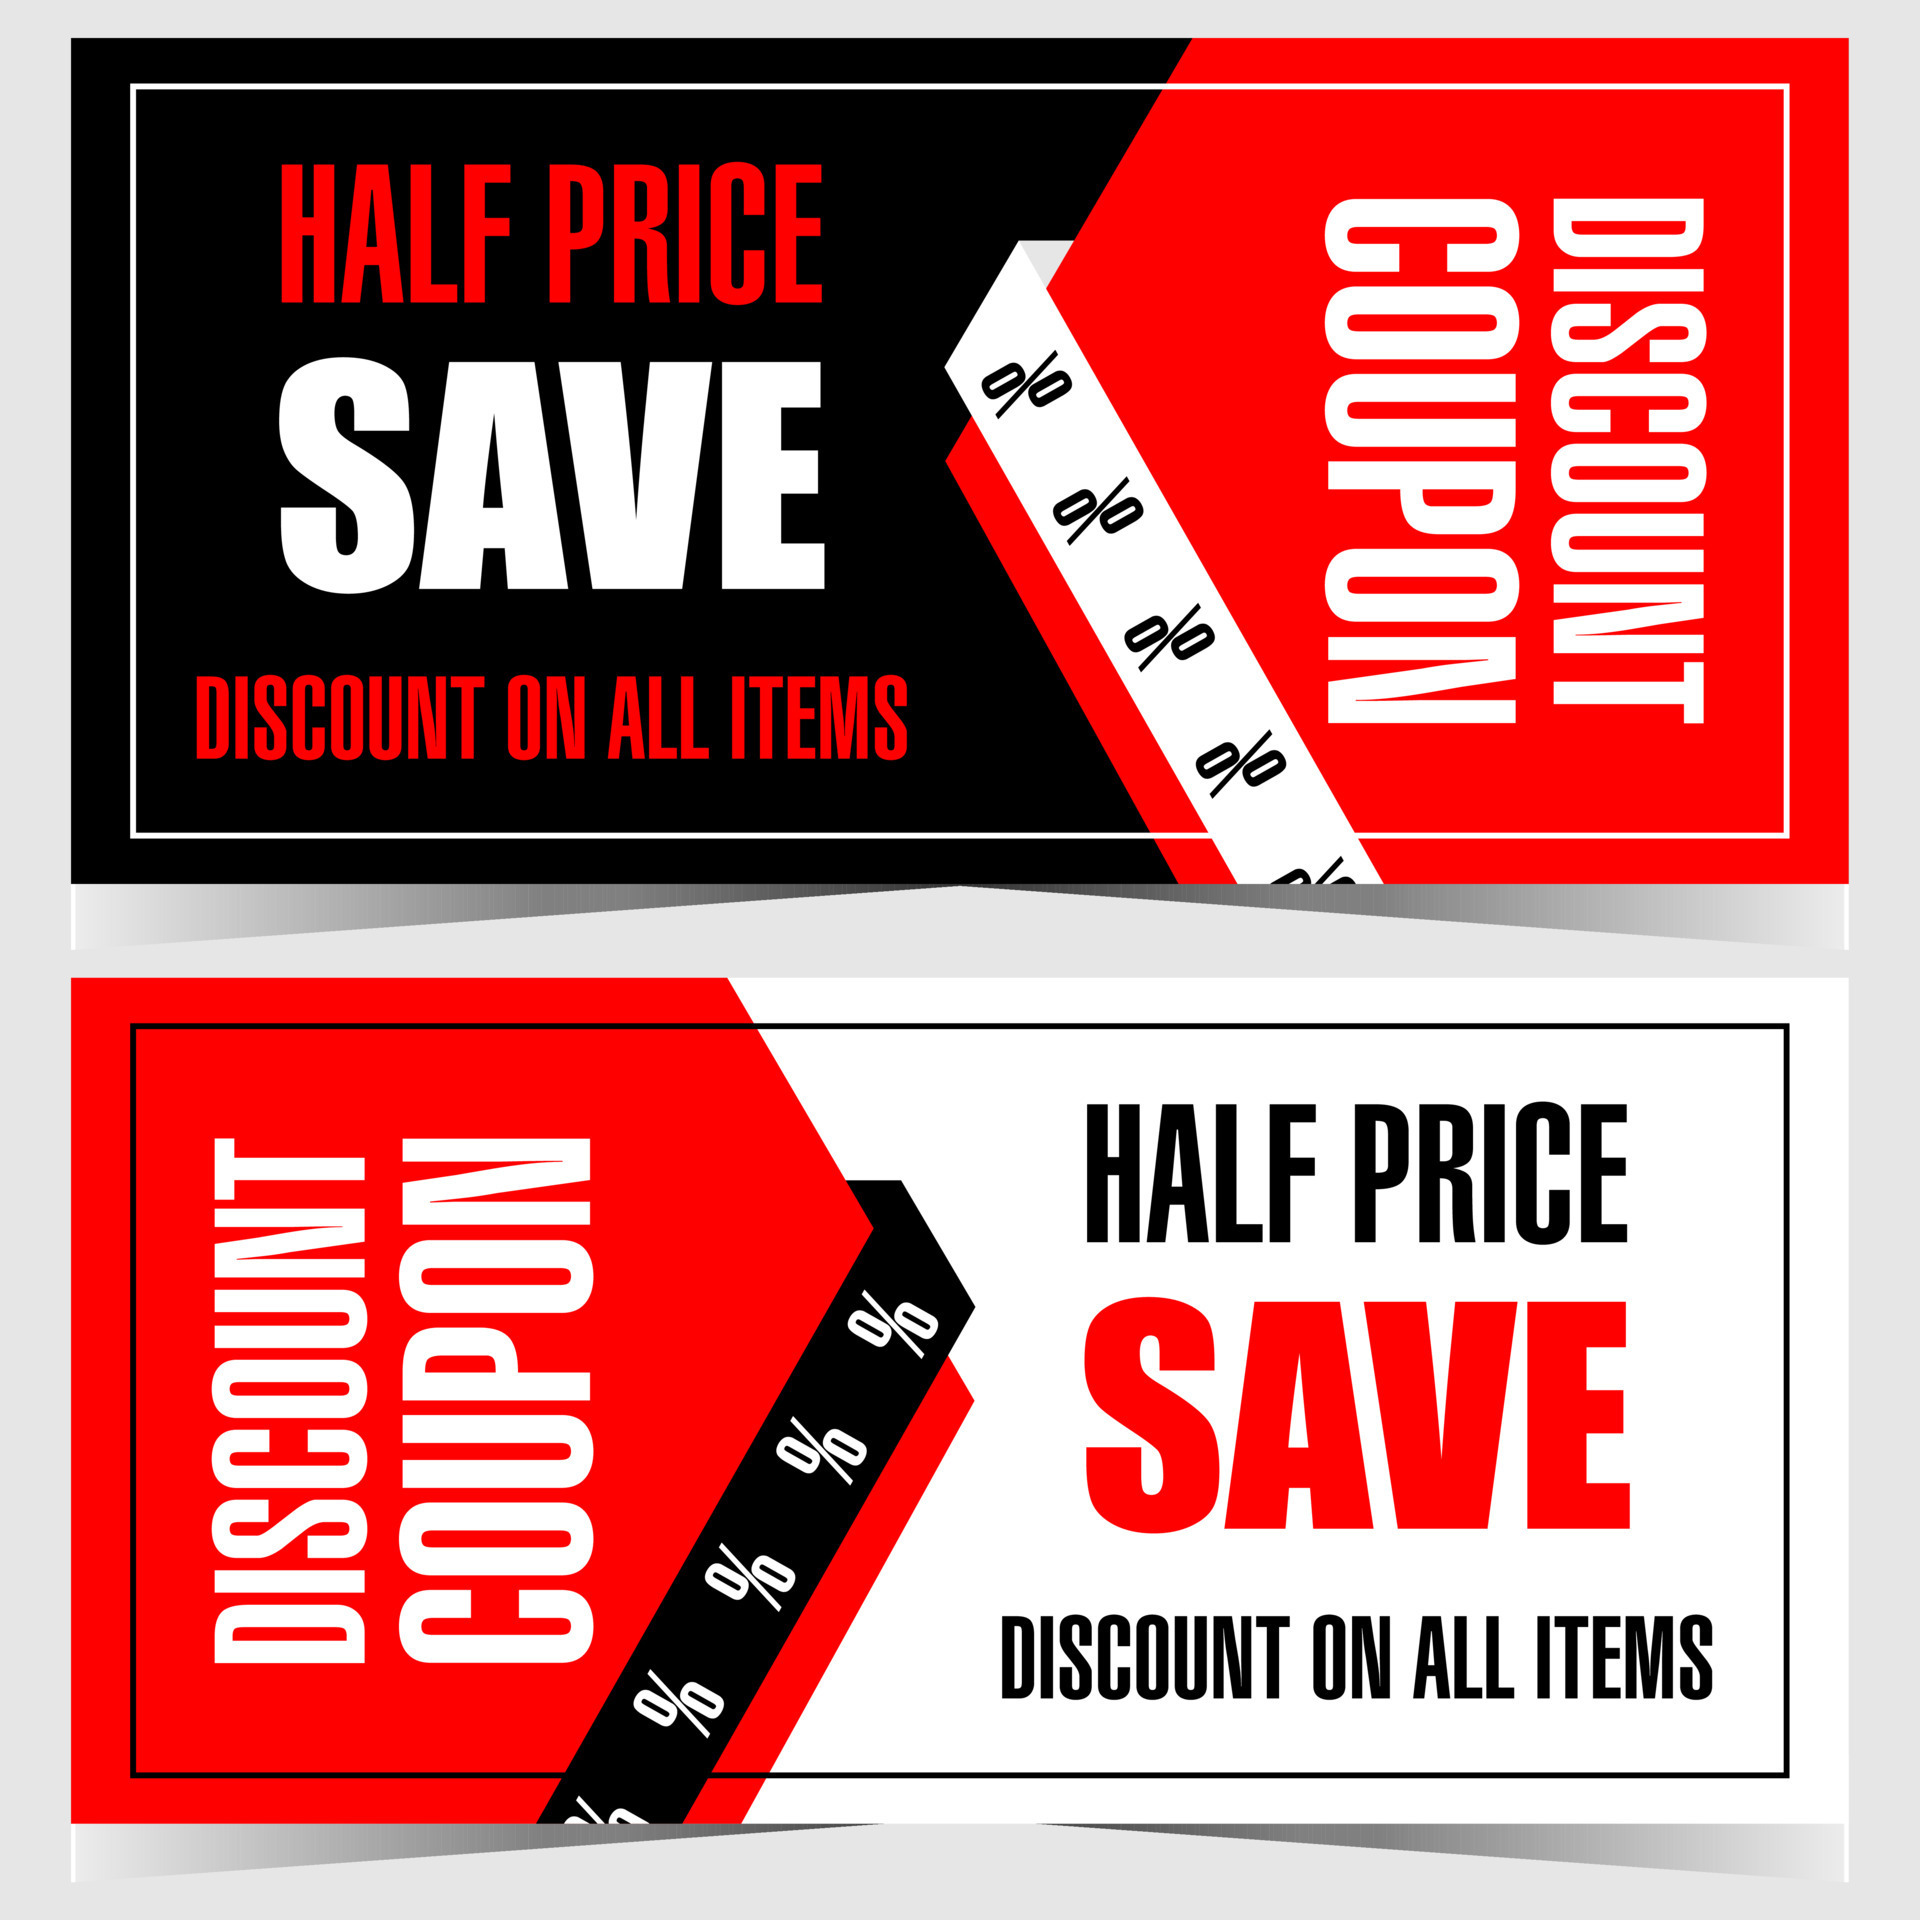 Discount coupon. Half price offer, promo code gift voucher a